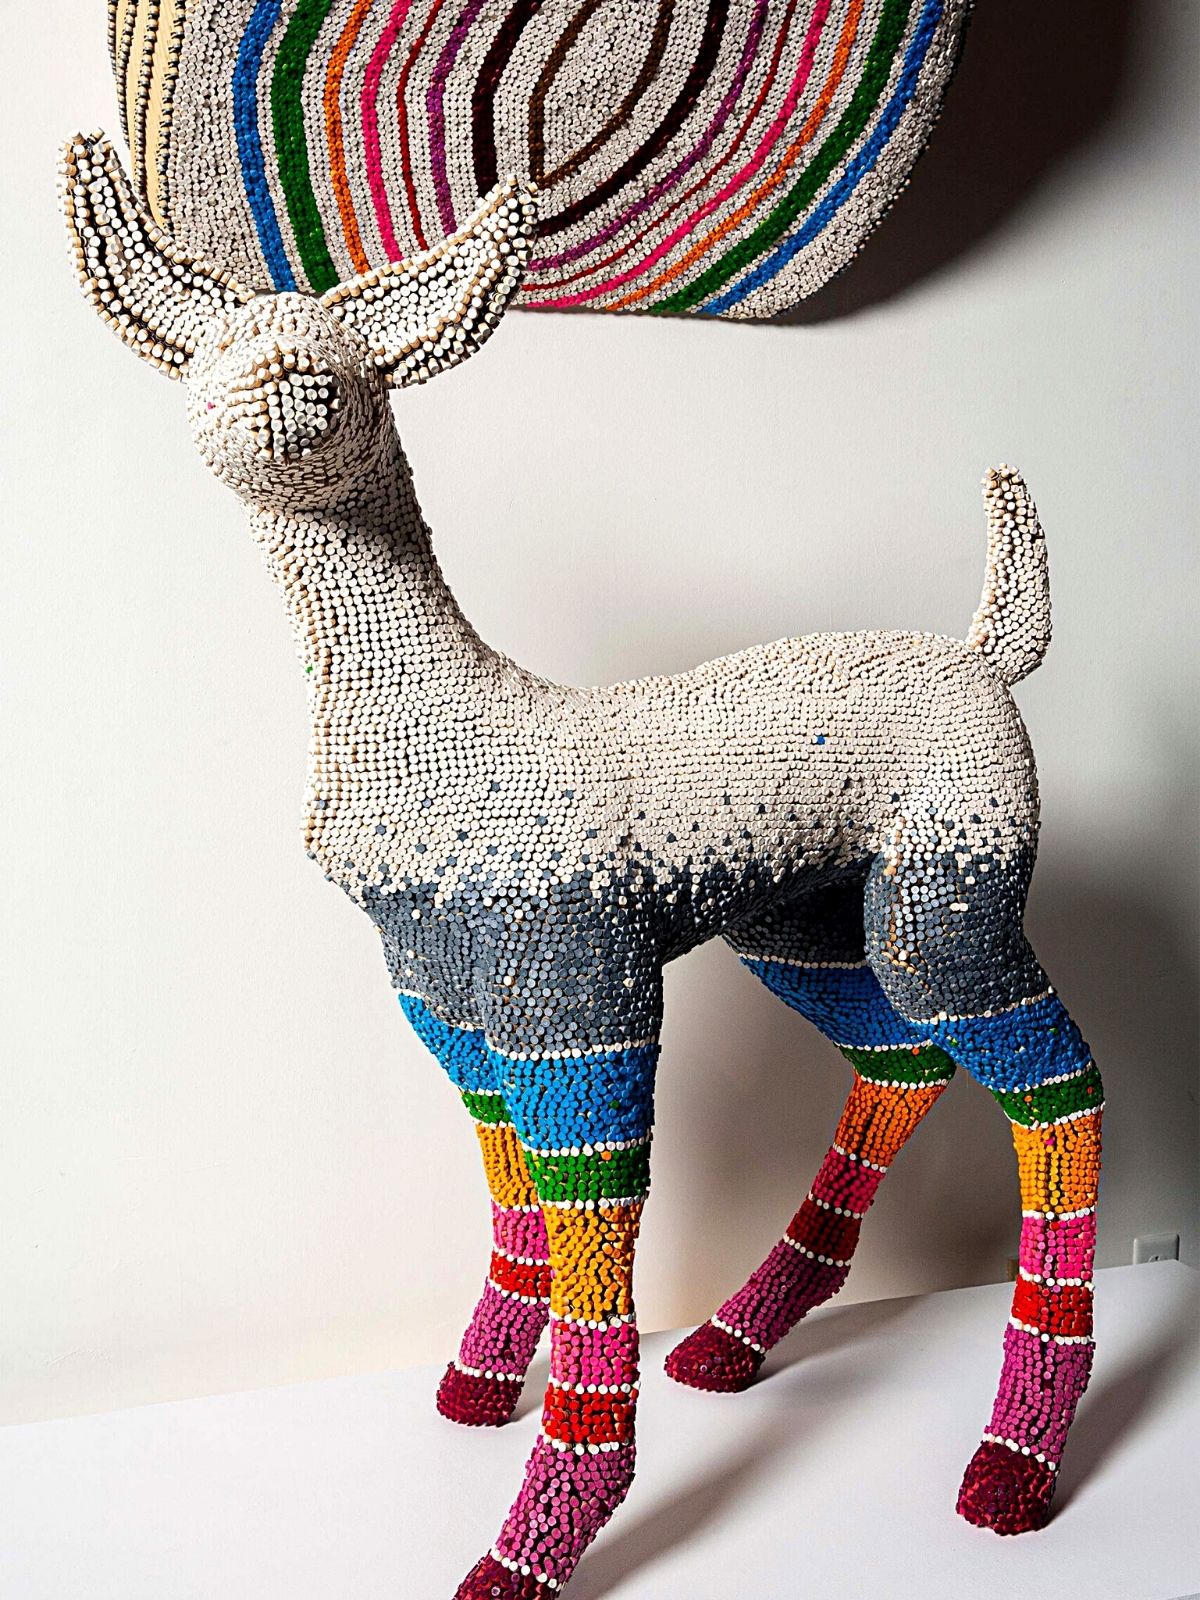 Colorful Crayon Animals Address Climate Change on thursd